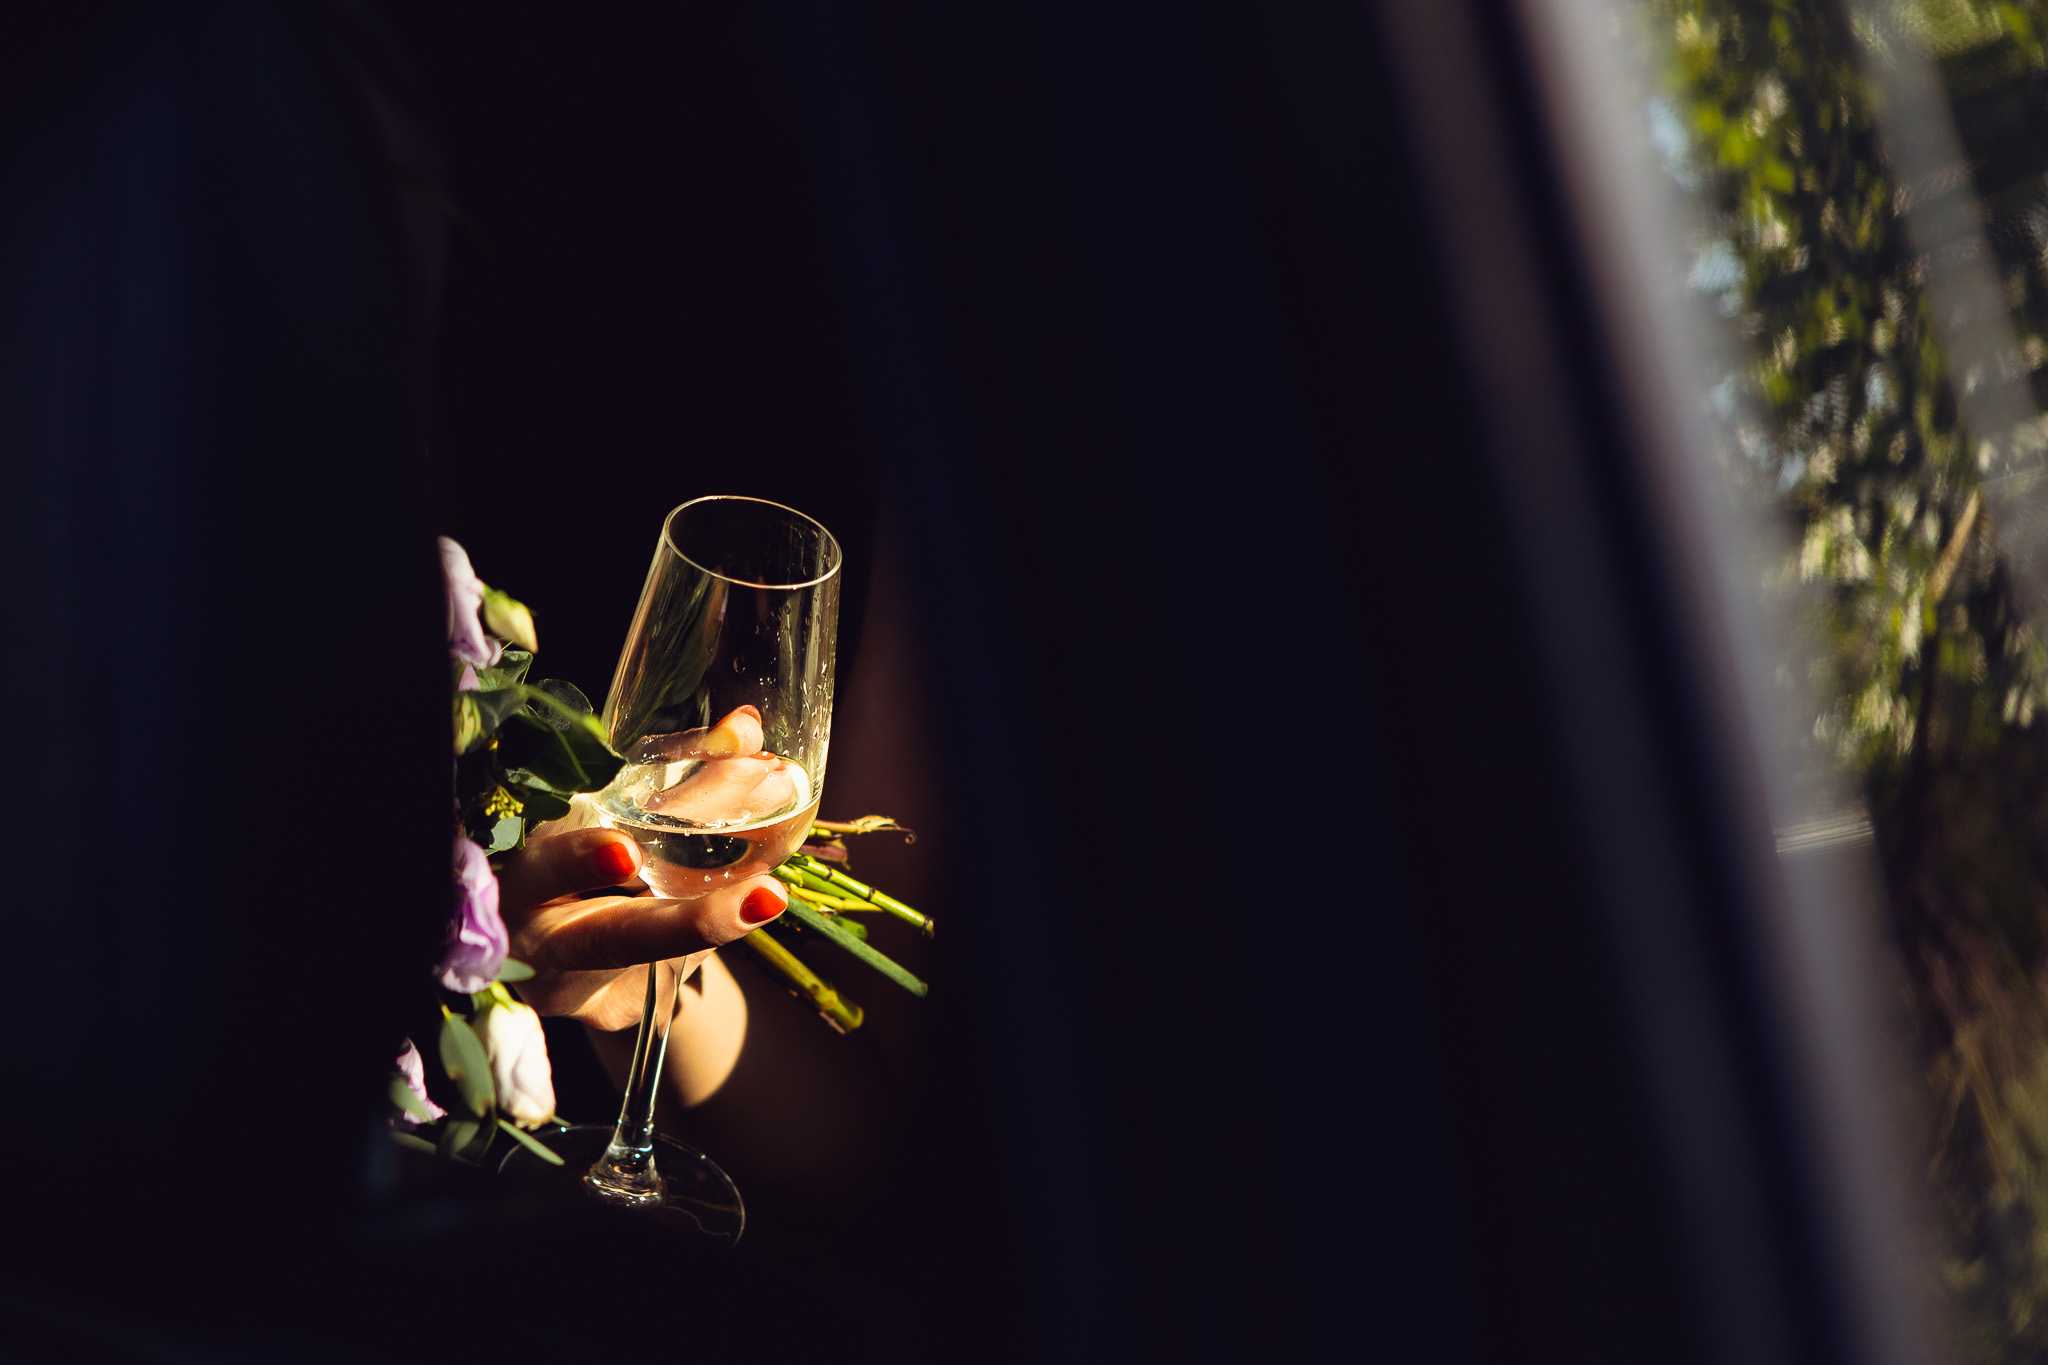 Sun shines on a woman's hand holding a champagne flute and bouquet